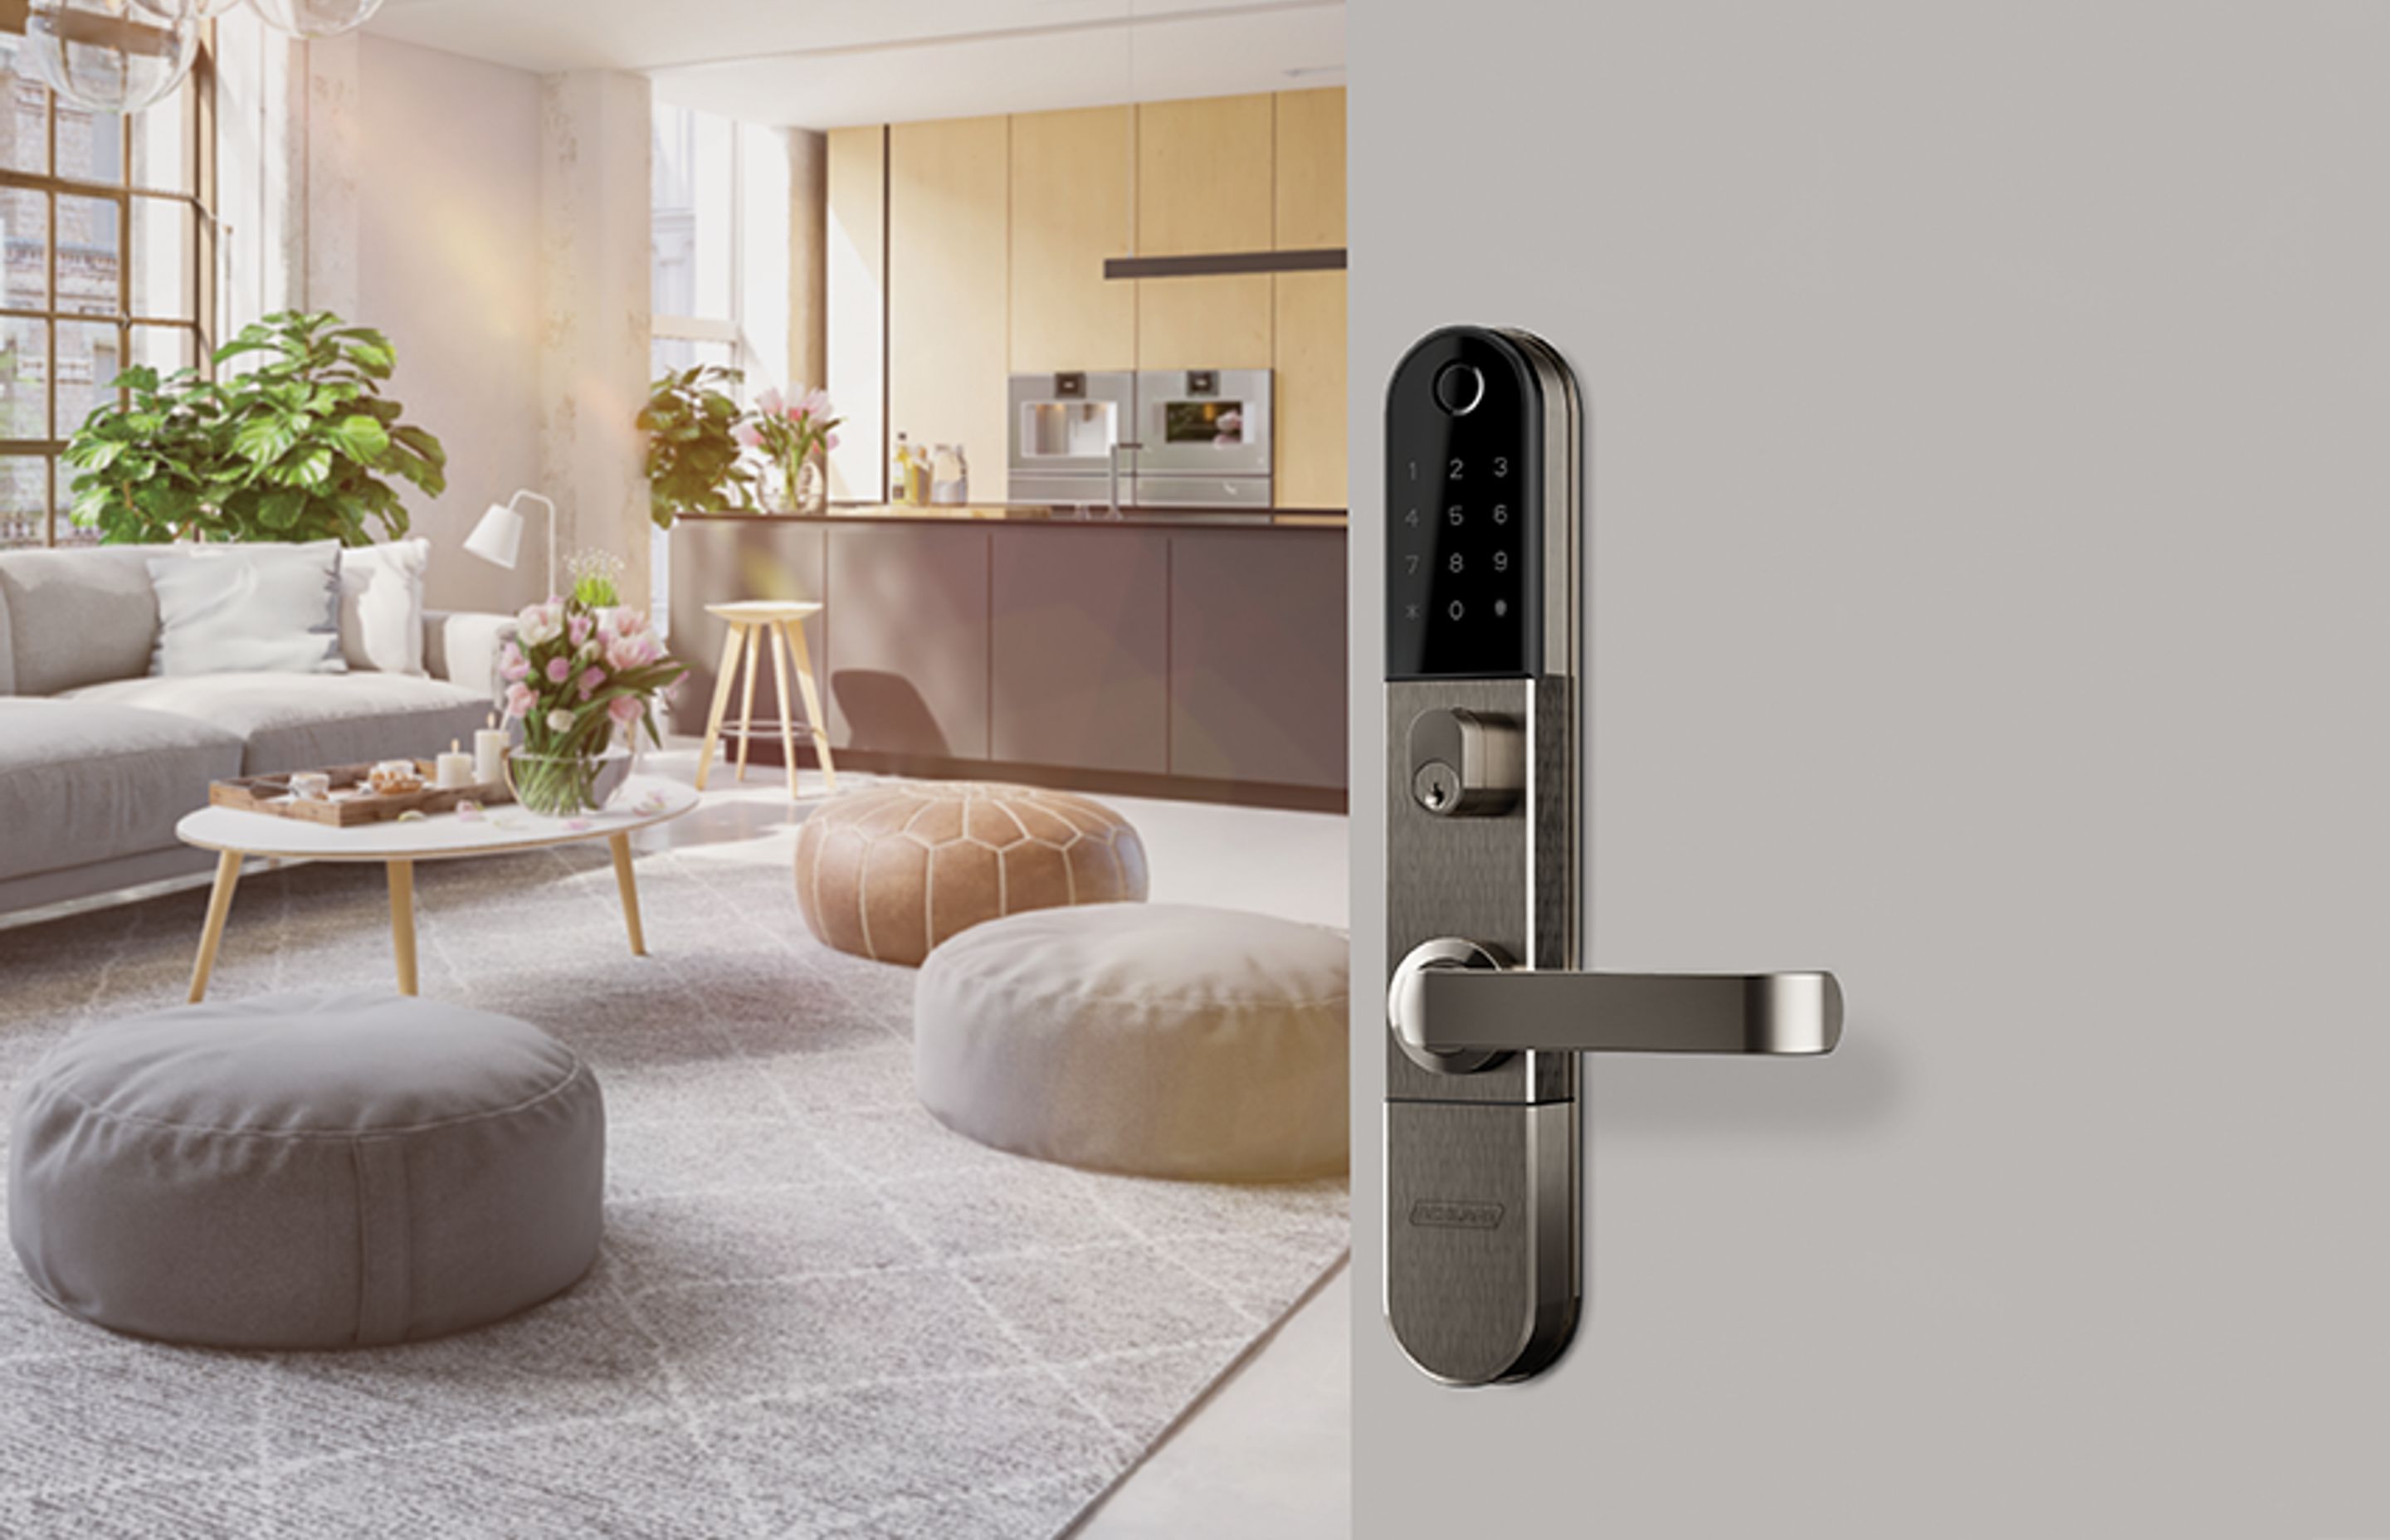 The Schlage Omnia is particularly suited to the multi-unit market where issues around accessibility and safety are key. It can easily be retro-fitted and comes in two finishes including satin nickel plate.